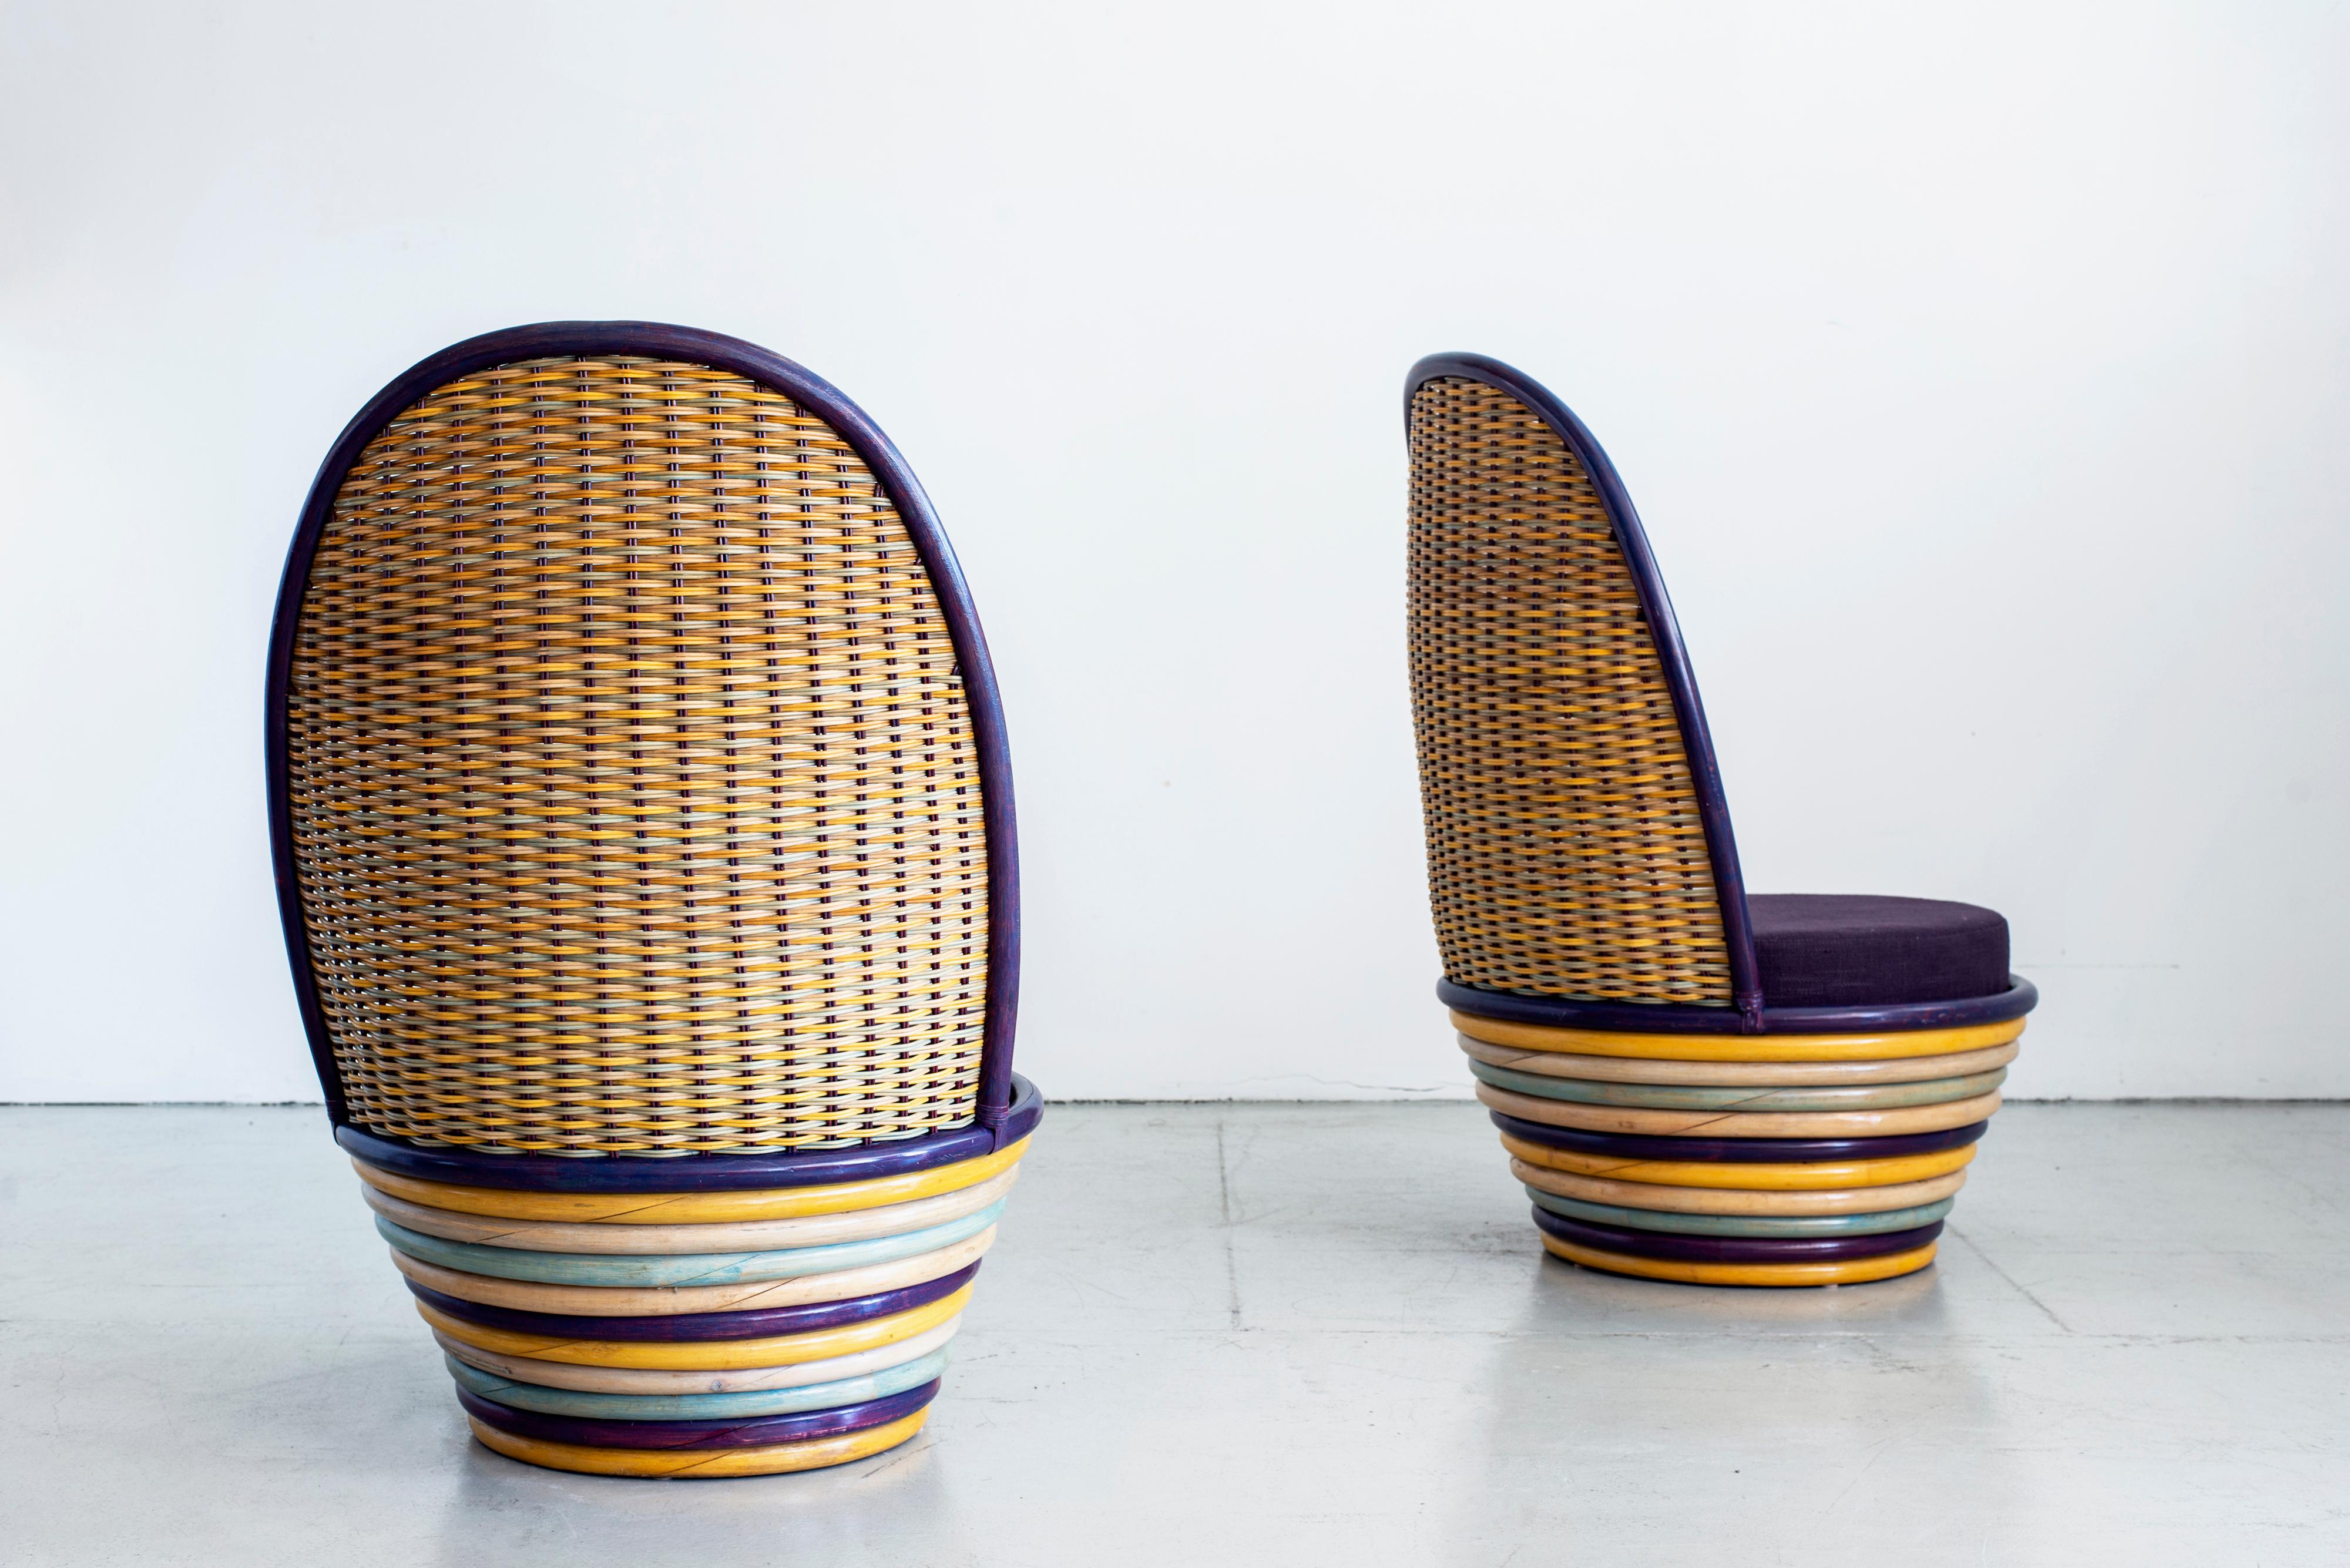 Vibrant pair of Italian woven wicker and rattan lounge chairs. Great colored striped rattan circular base and colored wicker back with newly upholstered purple cushioned seats.